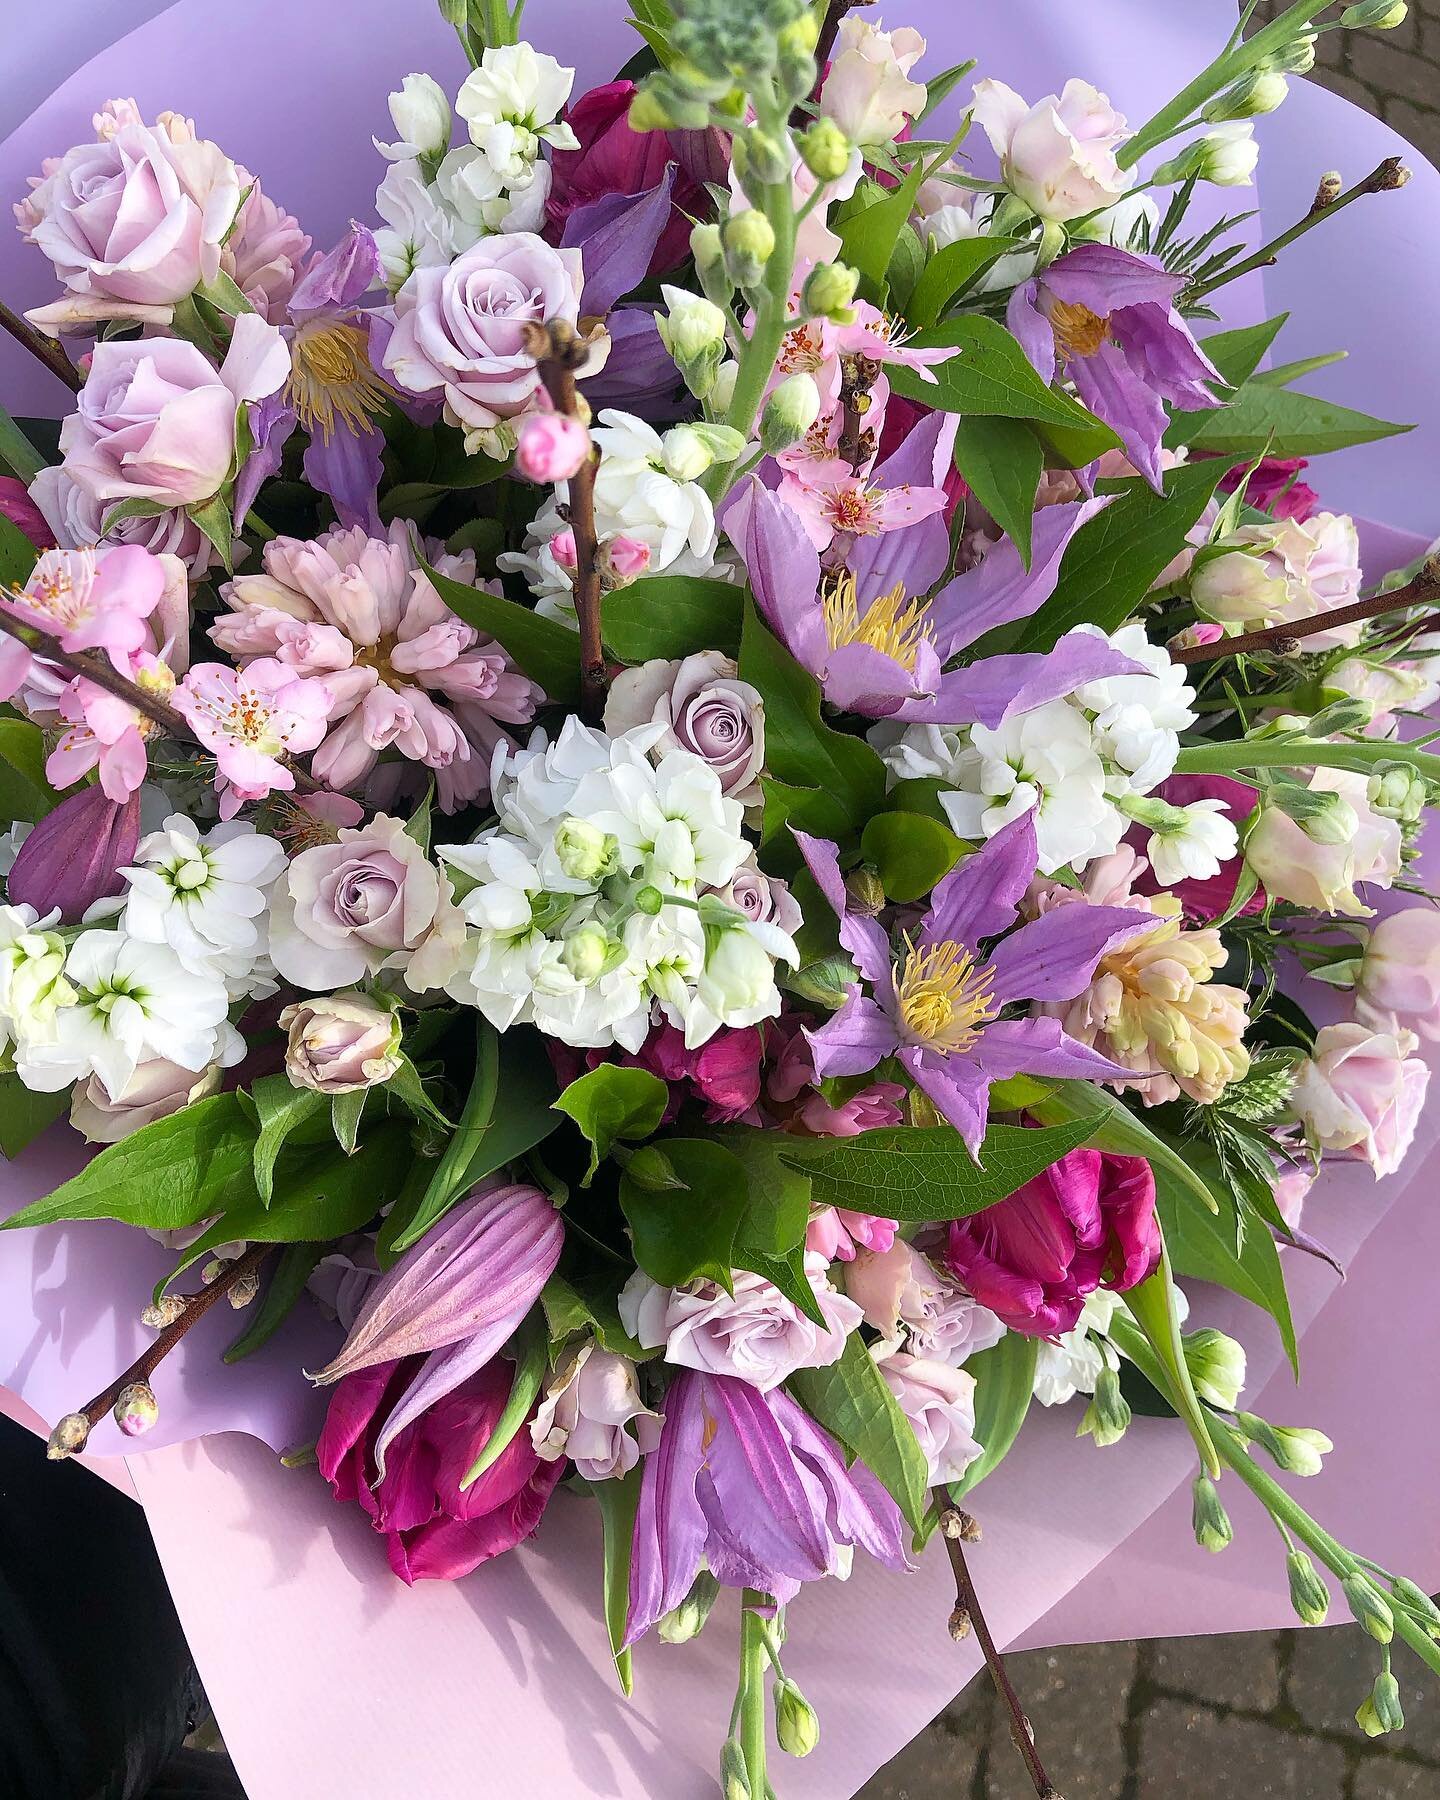 and just like that it&rsquo;s March (?!) which means Mother&rsquo;s Day is just ✨2 weeks away✨
wondering what to get your special lady? we&rsquo;ve got you covered 💜
.
head to the shop to order a bunch of incredible fresh Spring blooms to be deliver